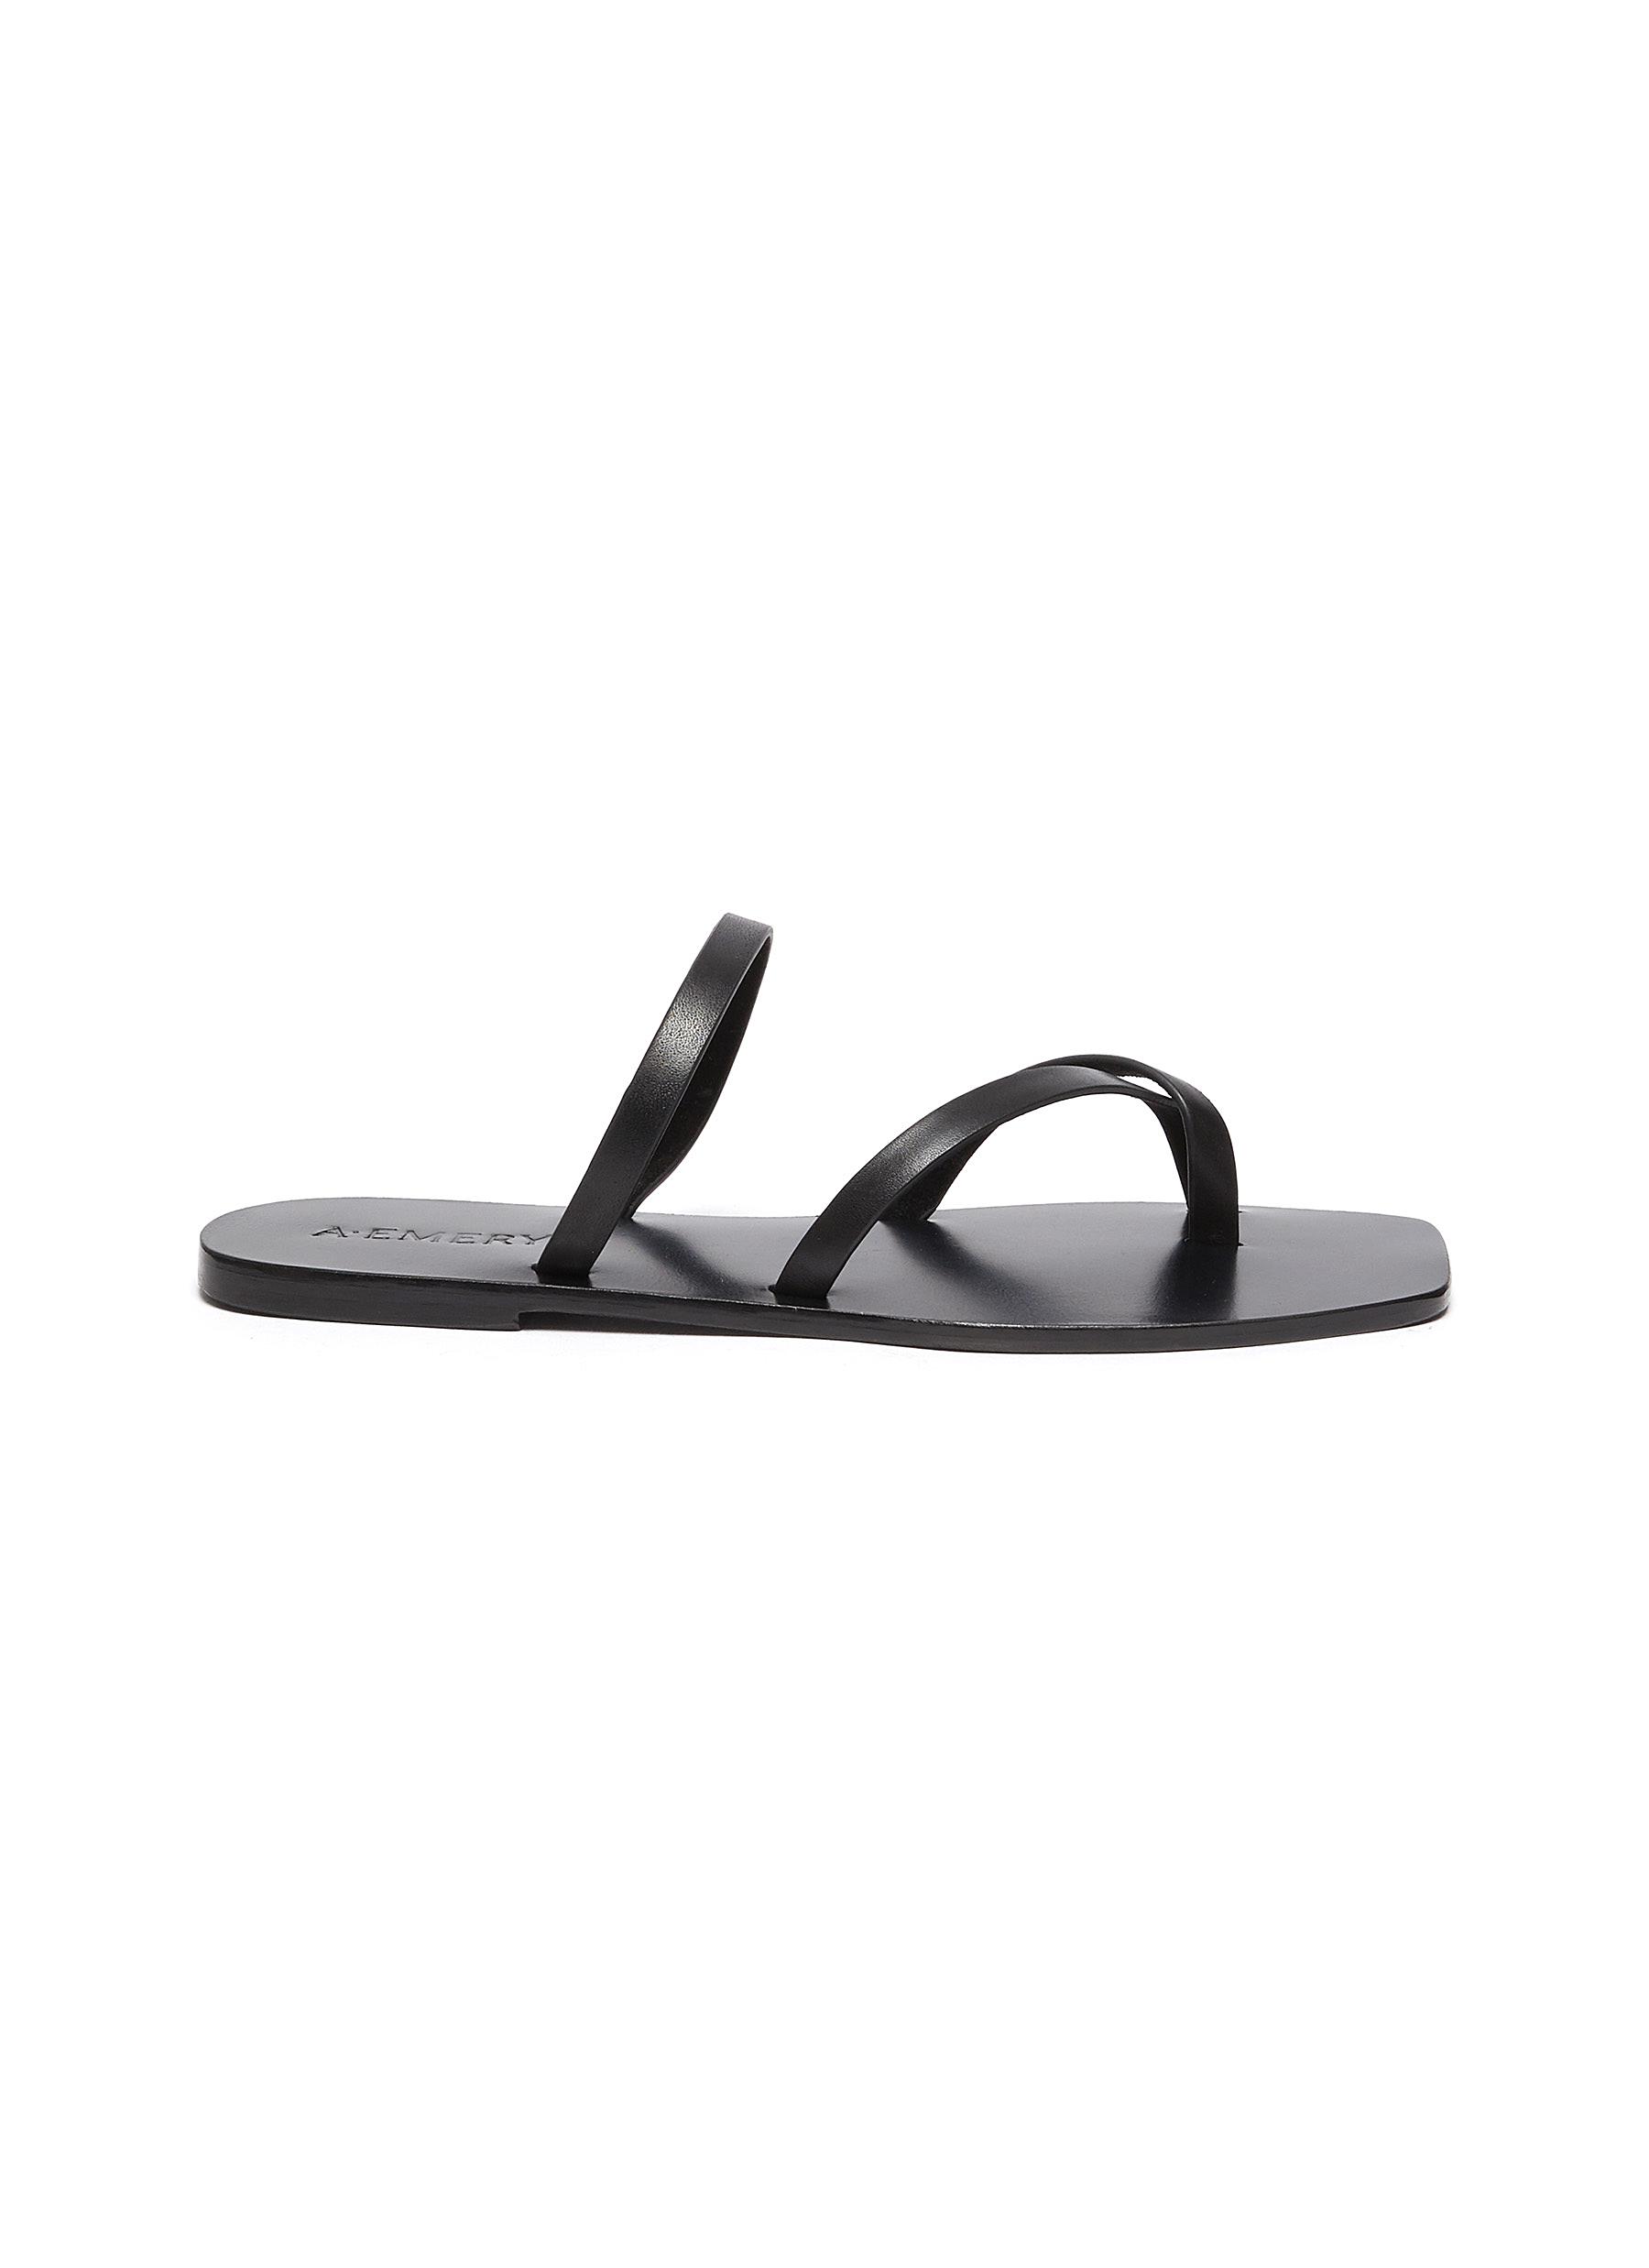 A.EMERY Colby' Crisscross Toe Strap Leather Flat Sandals